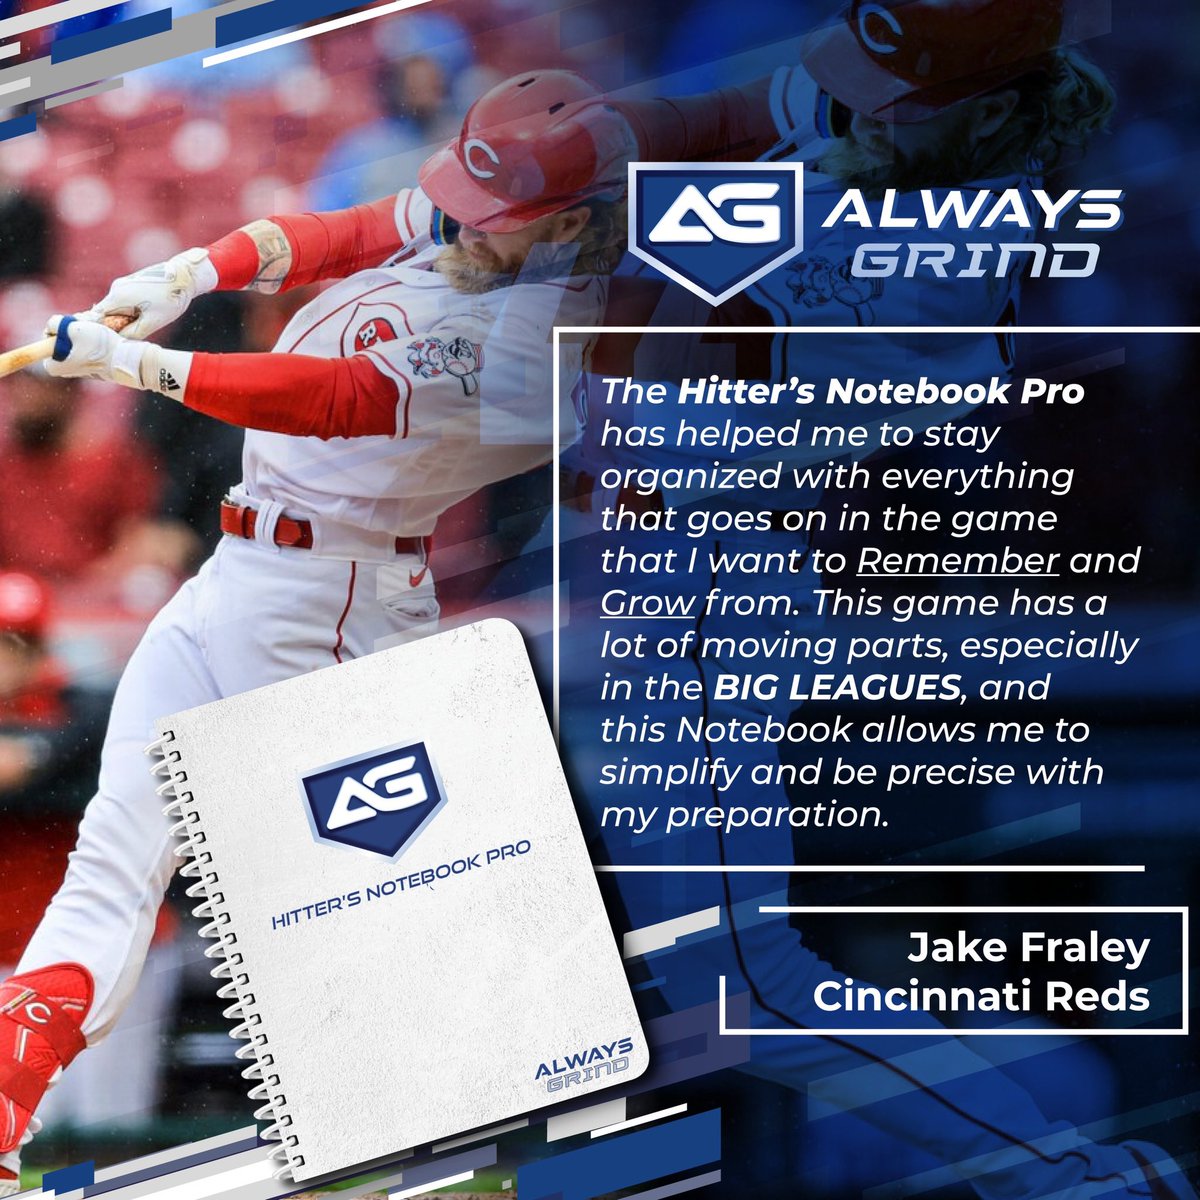 Cincinnati Reds OF - Jake Fraley “The Hitter’s Notebook Pro has helped me to Stay Organized with Everything that goes on in the game that I want to Remember and Grow from. This Game has a lot of moving parts, especially in the BIG LEAGUES, and this Notebook allows me to…